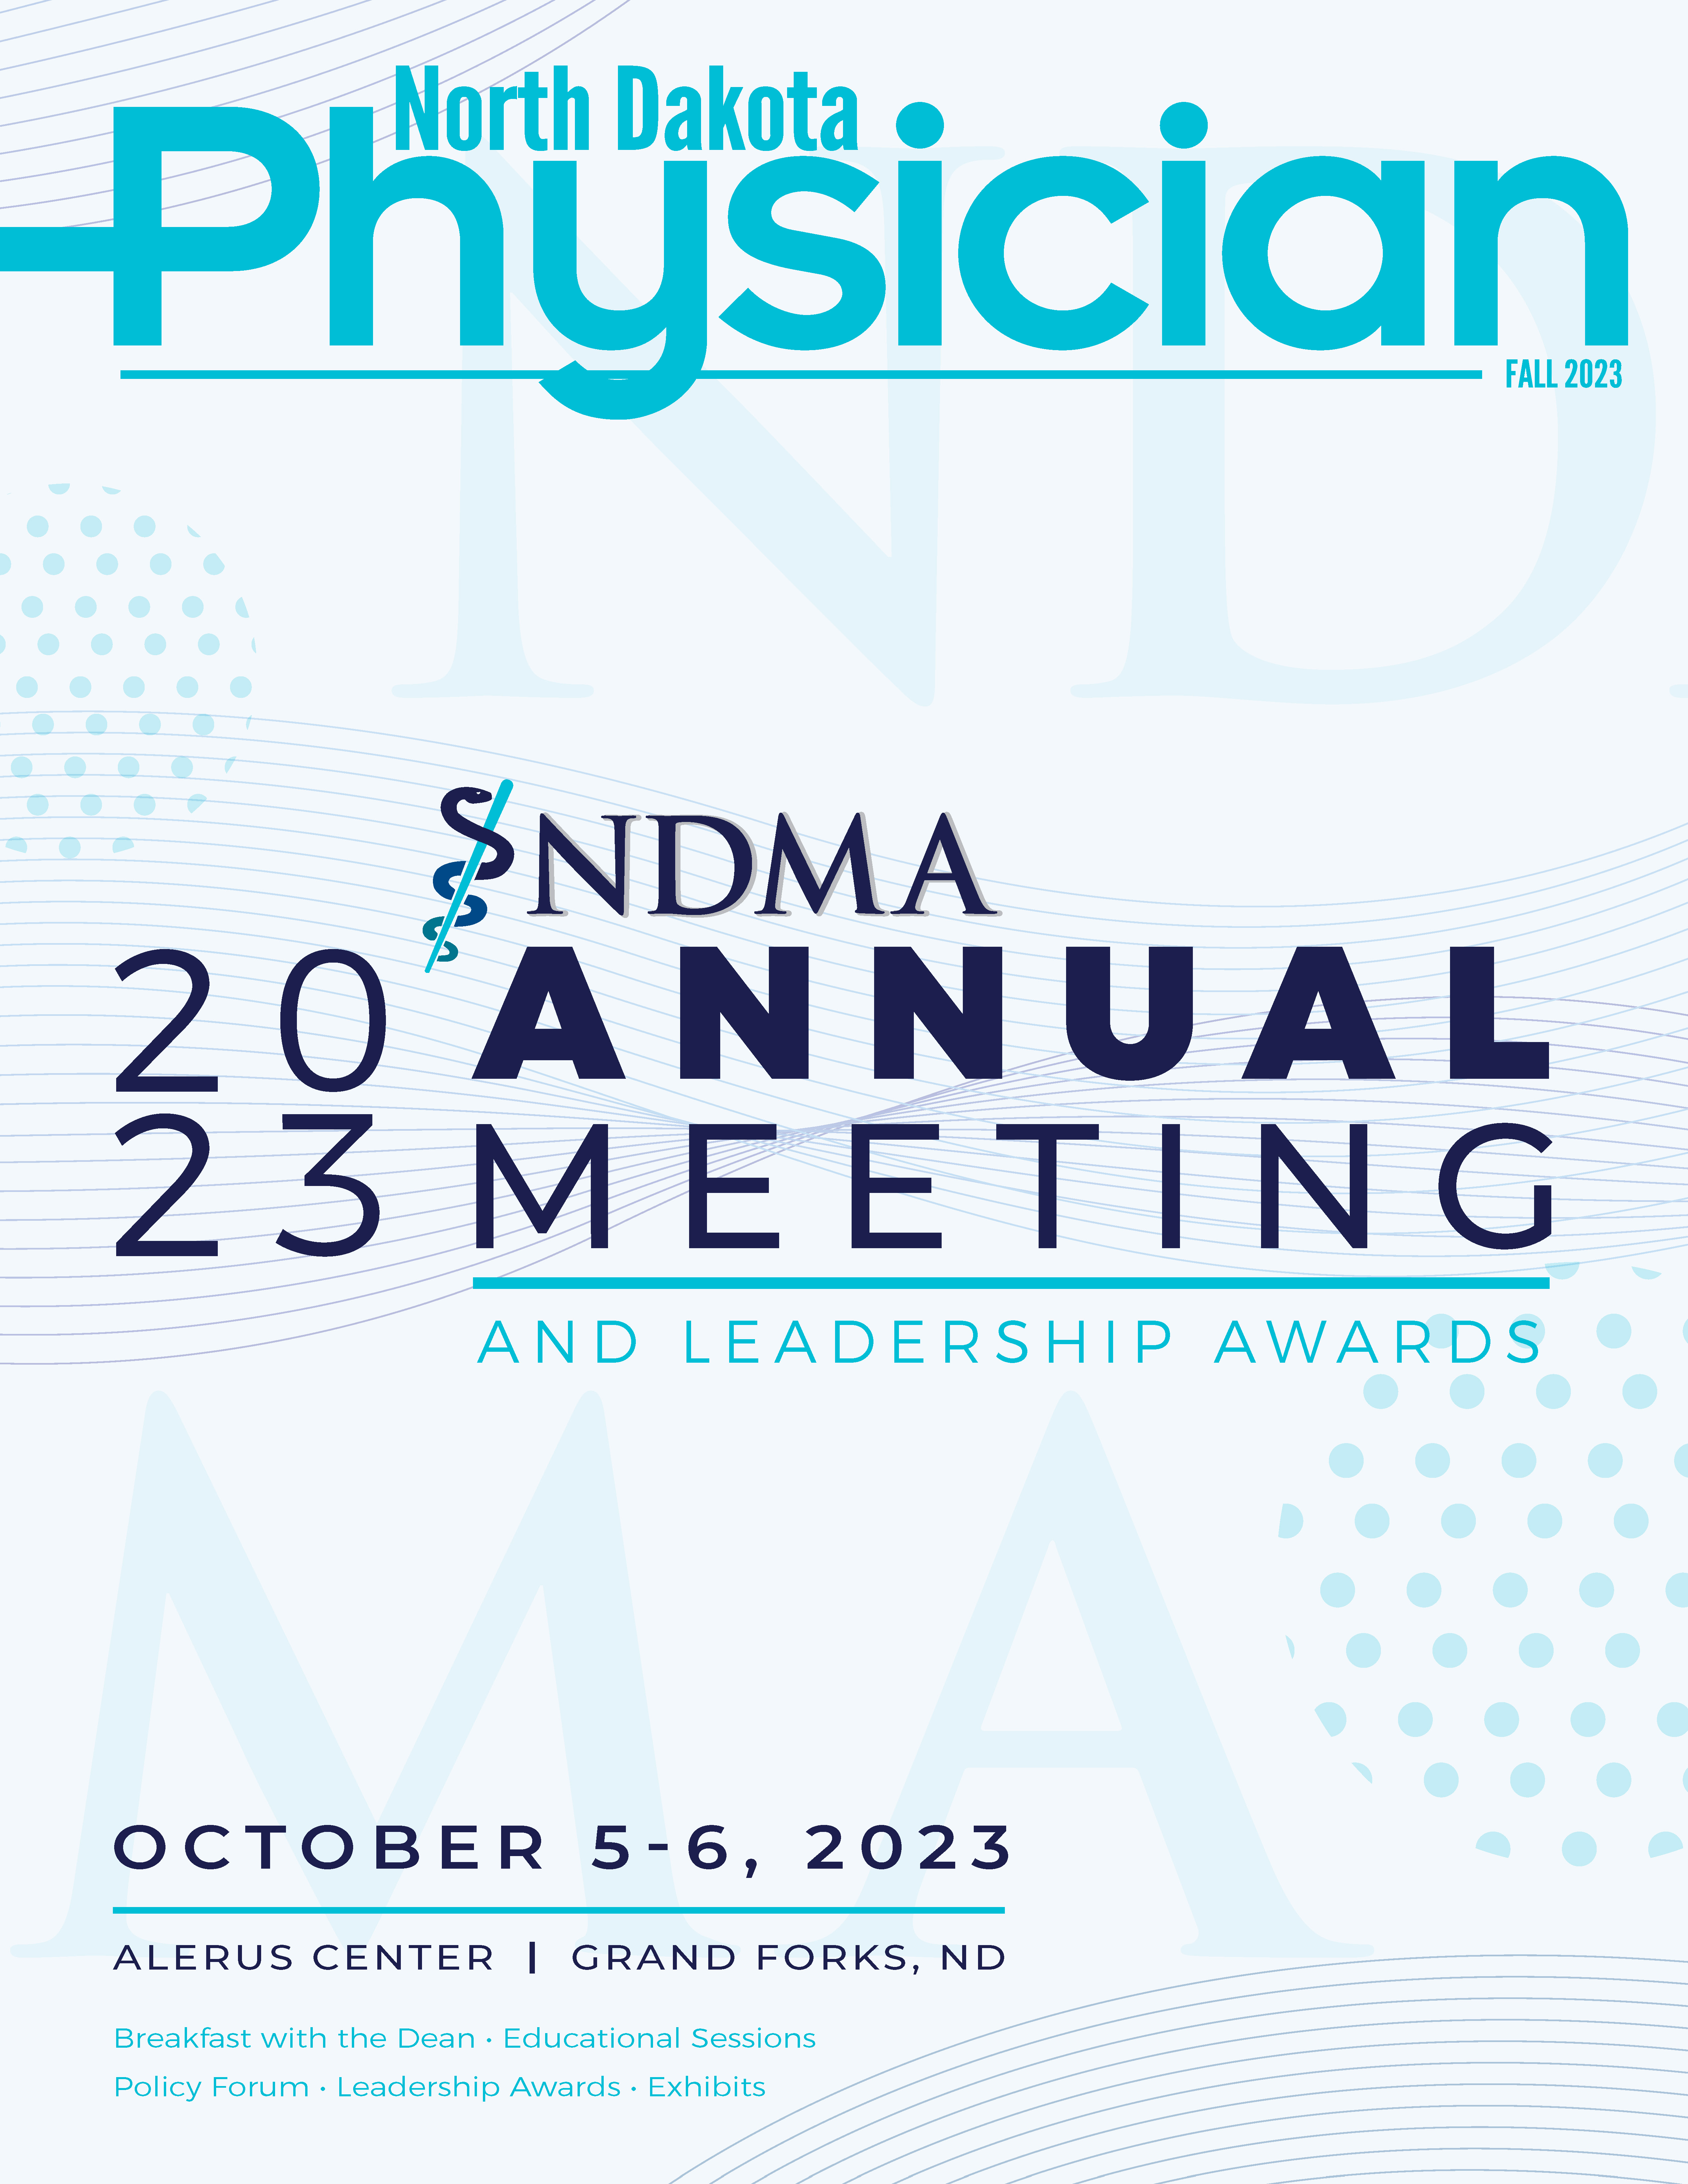 ND Physician Fall 2023 magazine cover